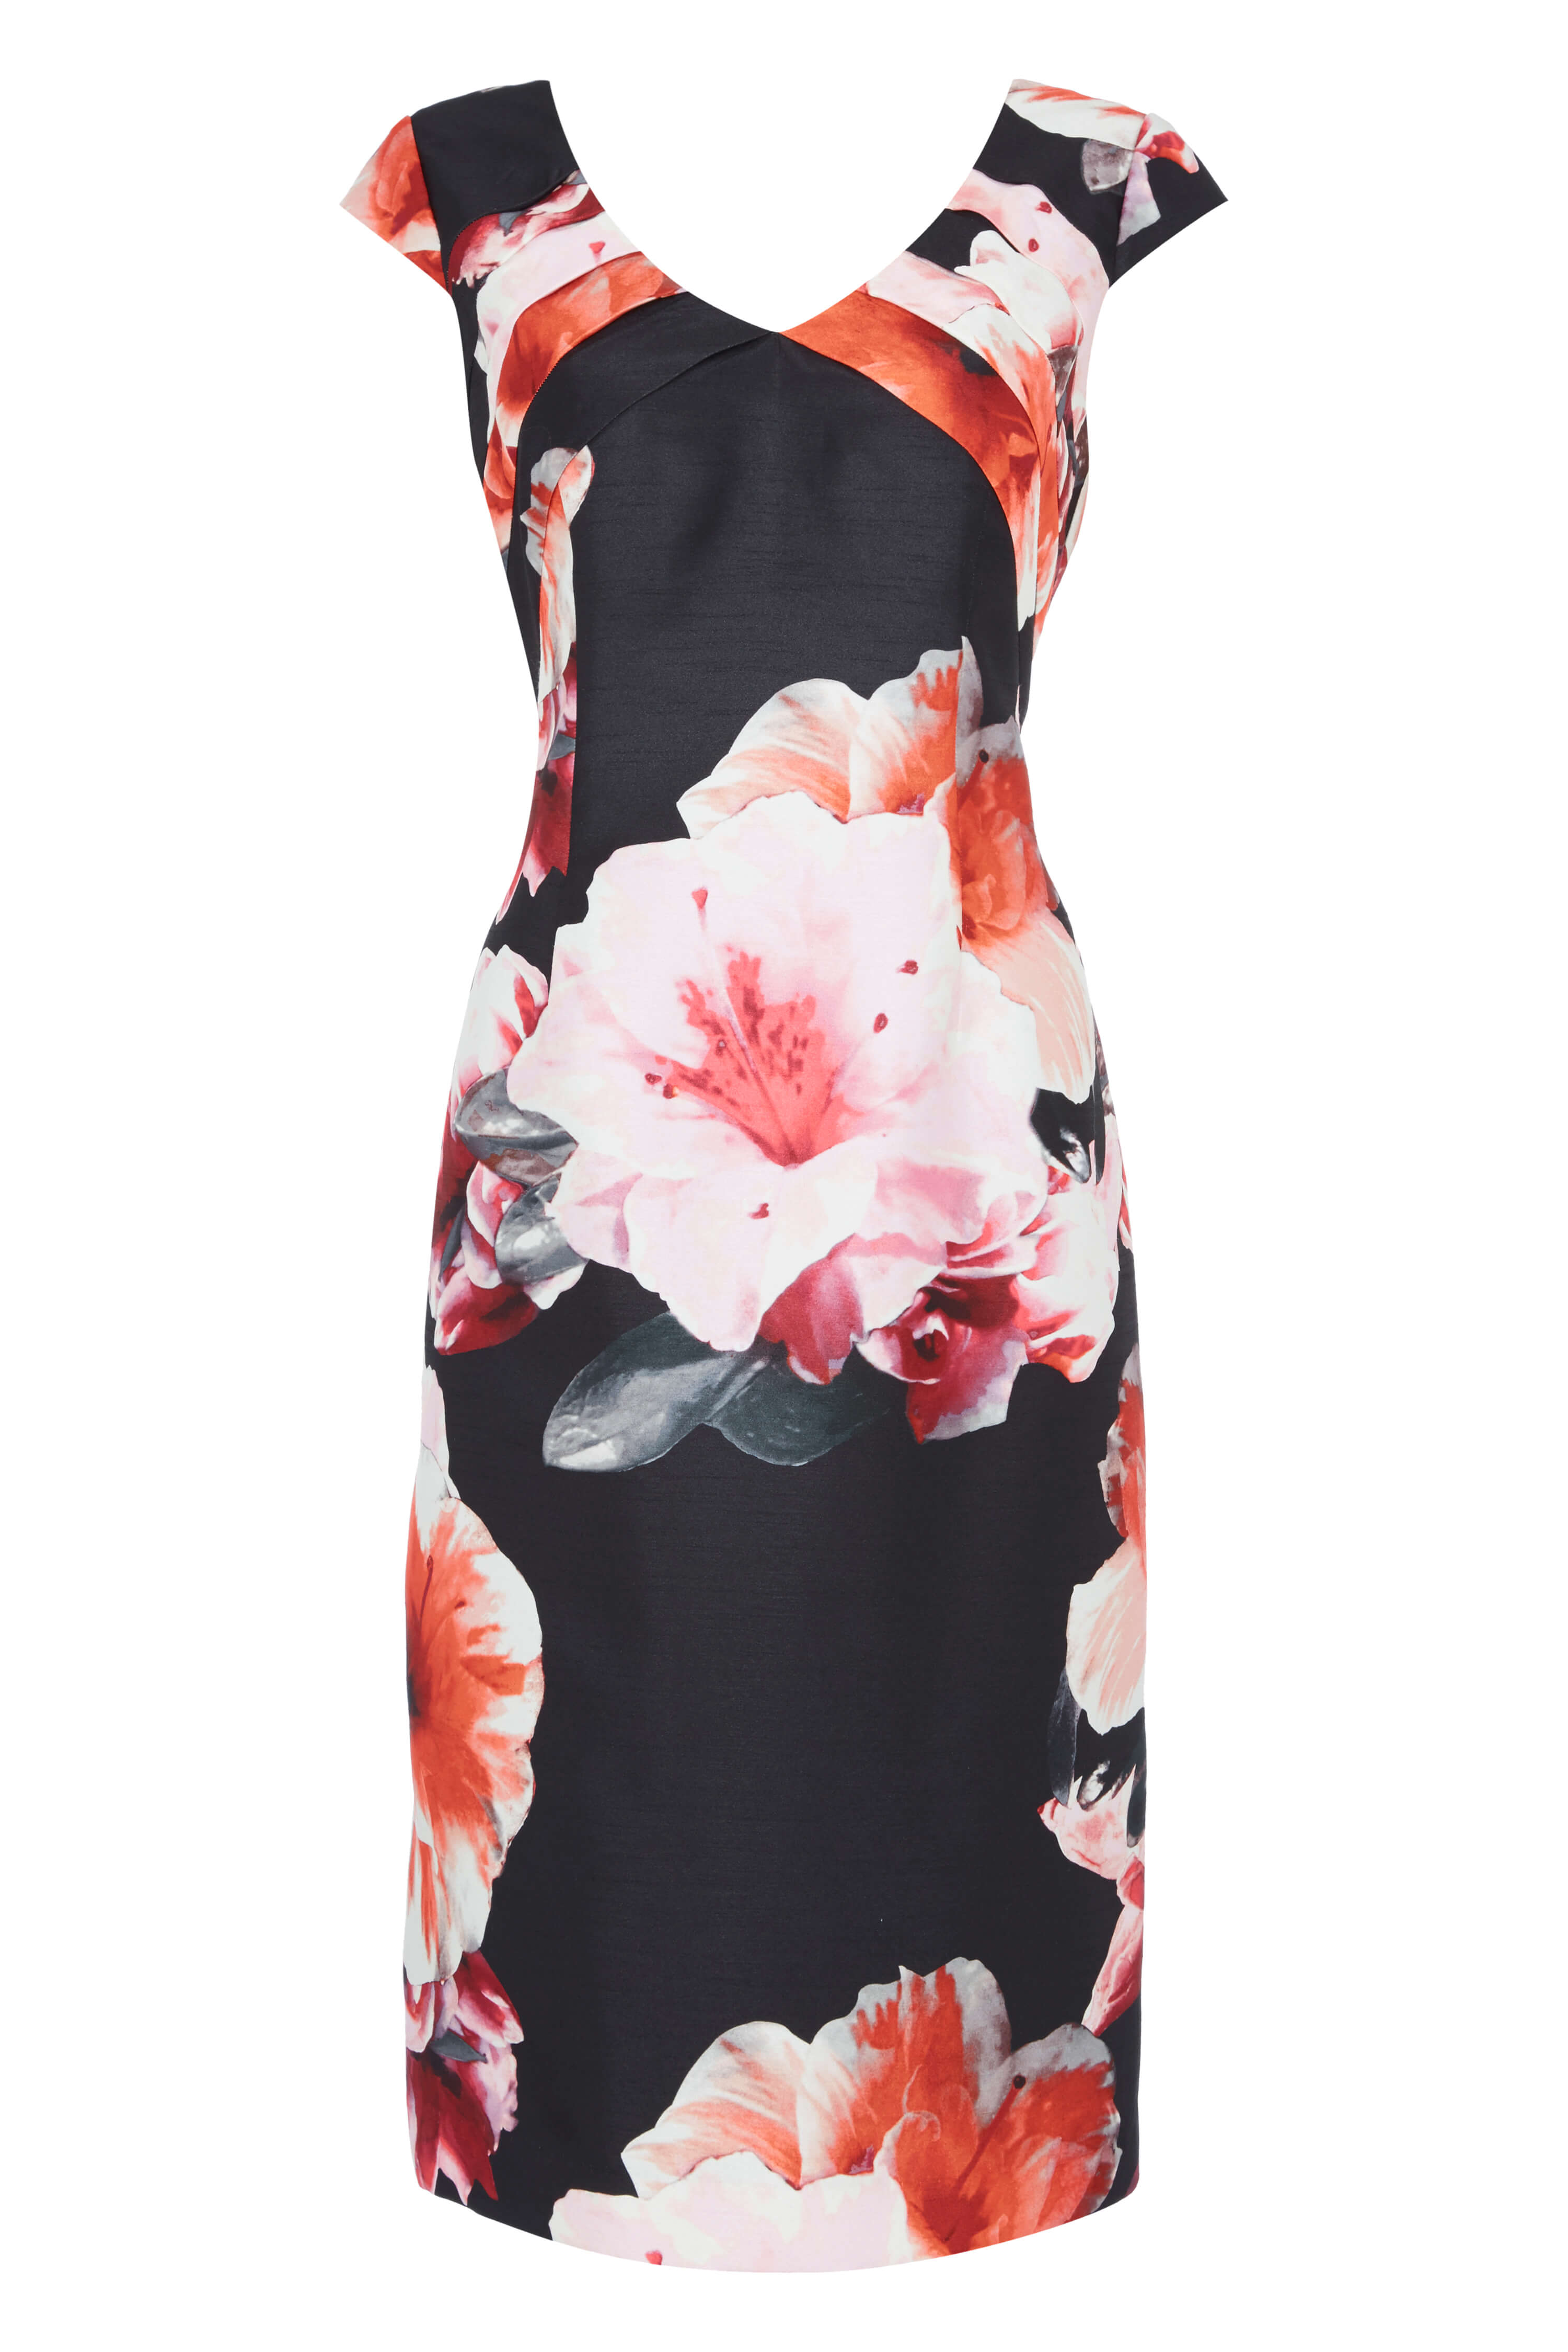 PINK Online Exclusive Pleat Detail Floral Dress, Image 4 of 4